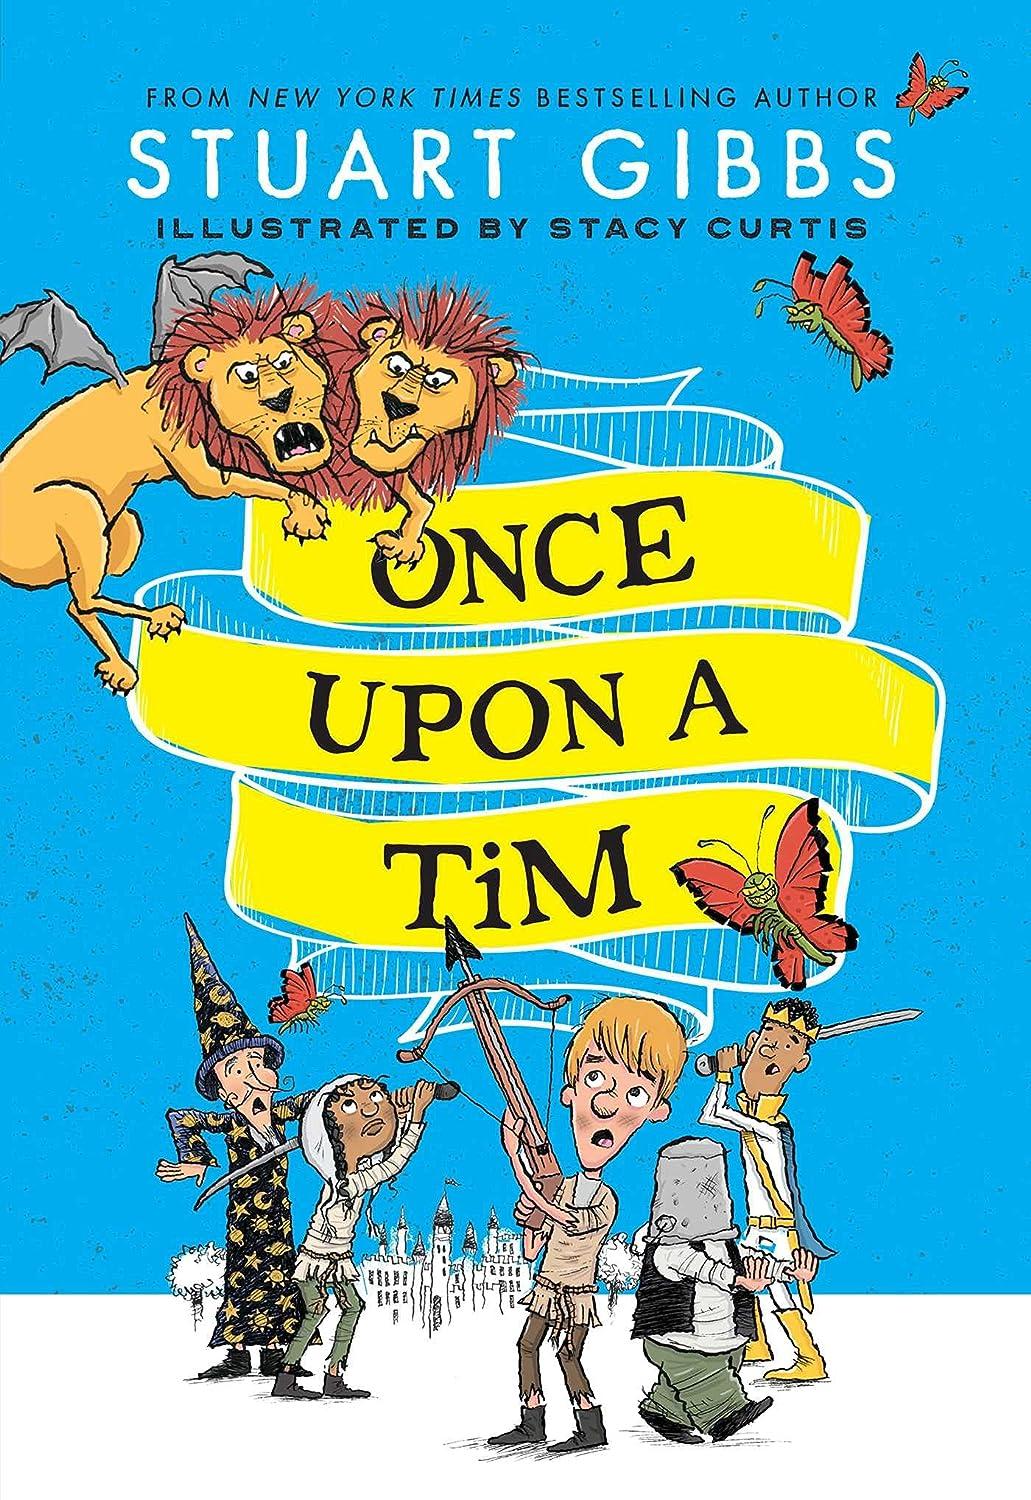 Book cover for the Once Upon A Tim by Stuart Gibbs